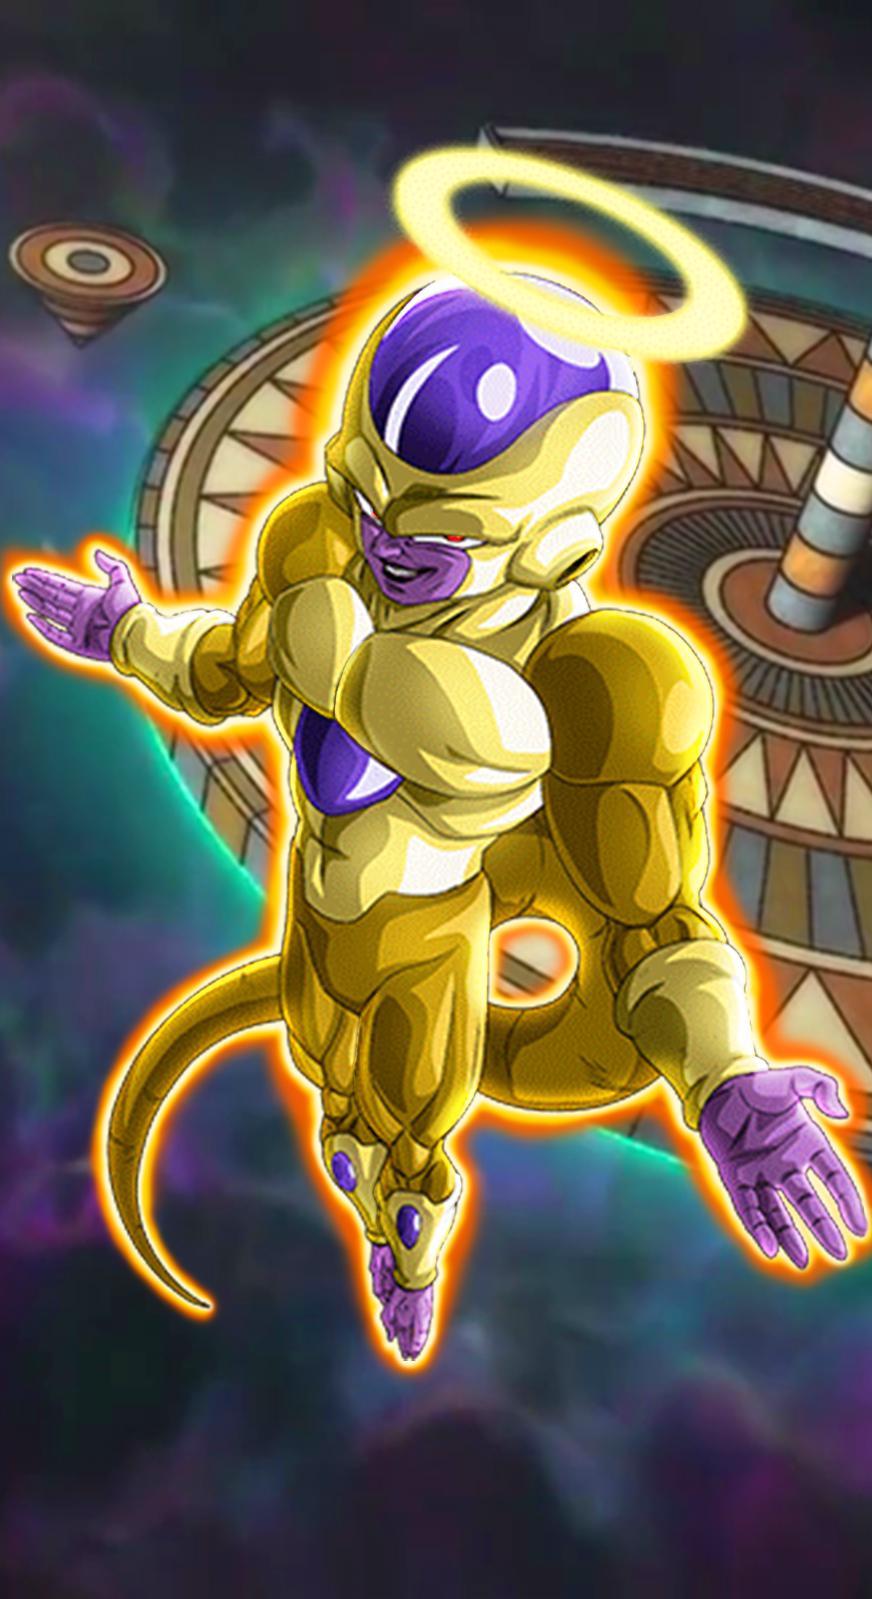 Angel Golden Frieza wallpaper apologies if the quality looks bad